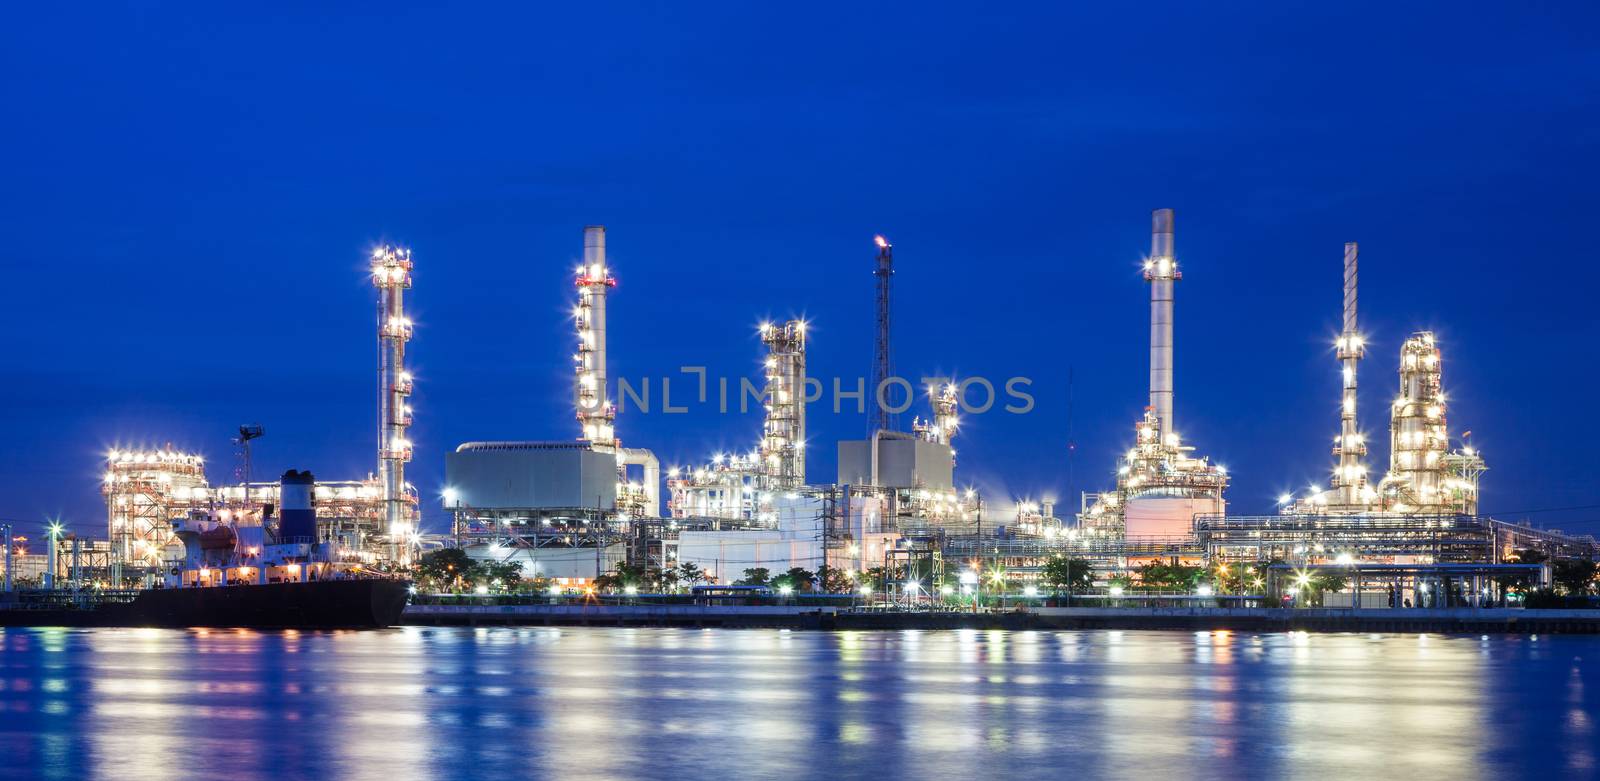 Oil refinery and blue sky near a river at thailand by darkkong